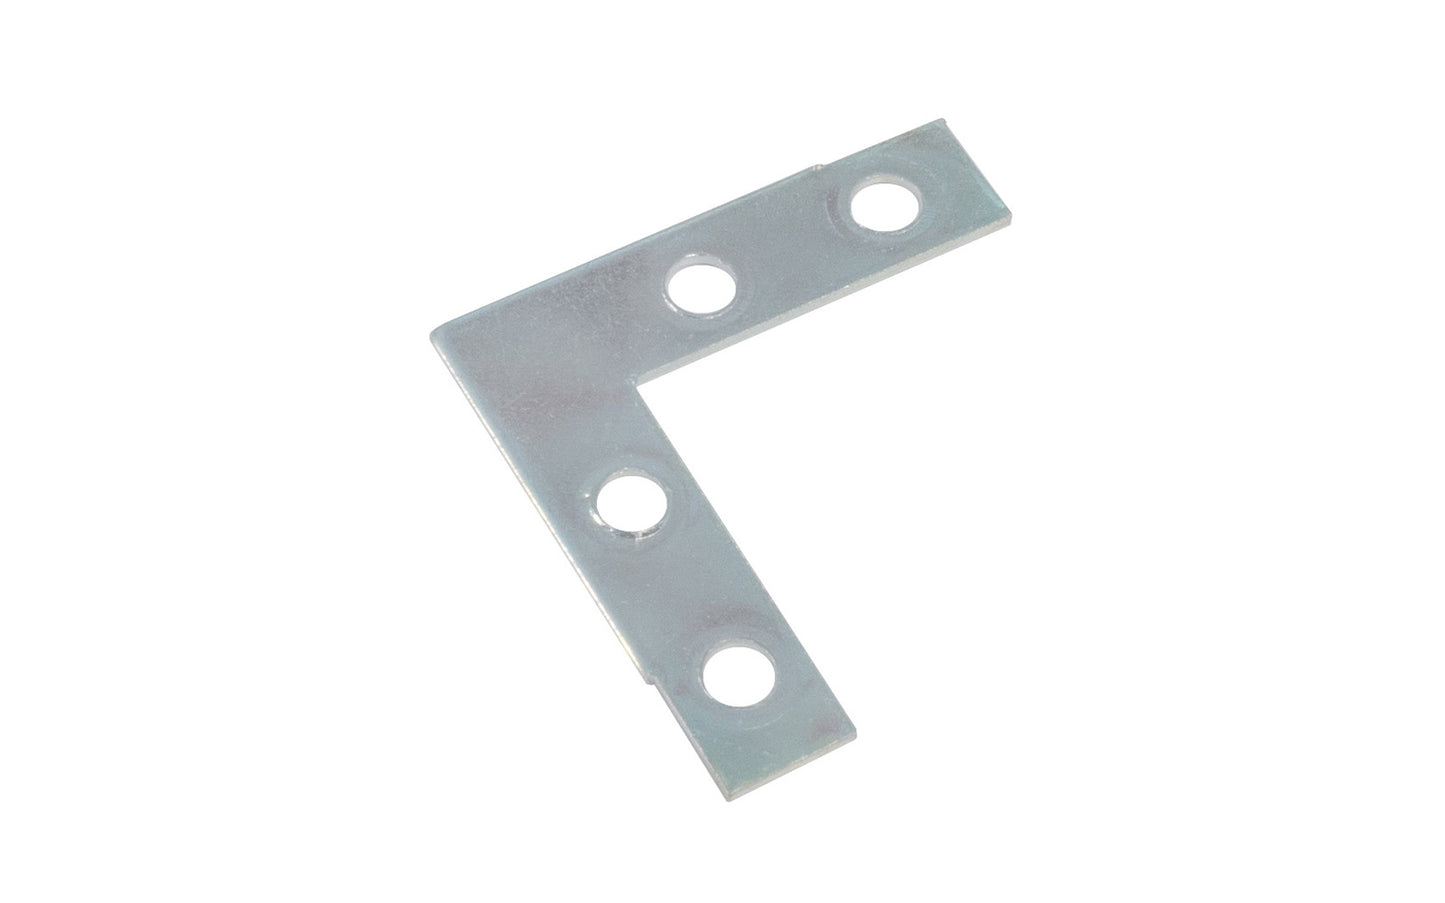 1-1/2" Zinc-Plated Flat Corner Iron. These flat corner irons are designed for furniture, cabinets, shelving support, etc. Steel material with a zinc plated finish. Countersunk holes. Sold as singles, or bulk box of (48) flat corner braces. 1-1/2"  long x 1-1/2" long size. Screws not included. Made by Ferum. Model 228.